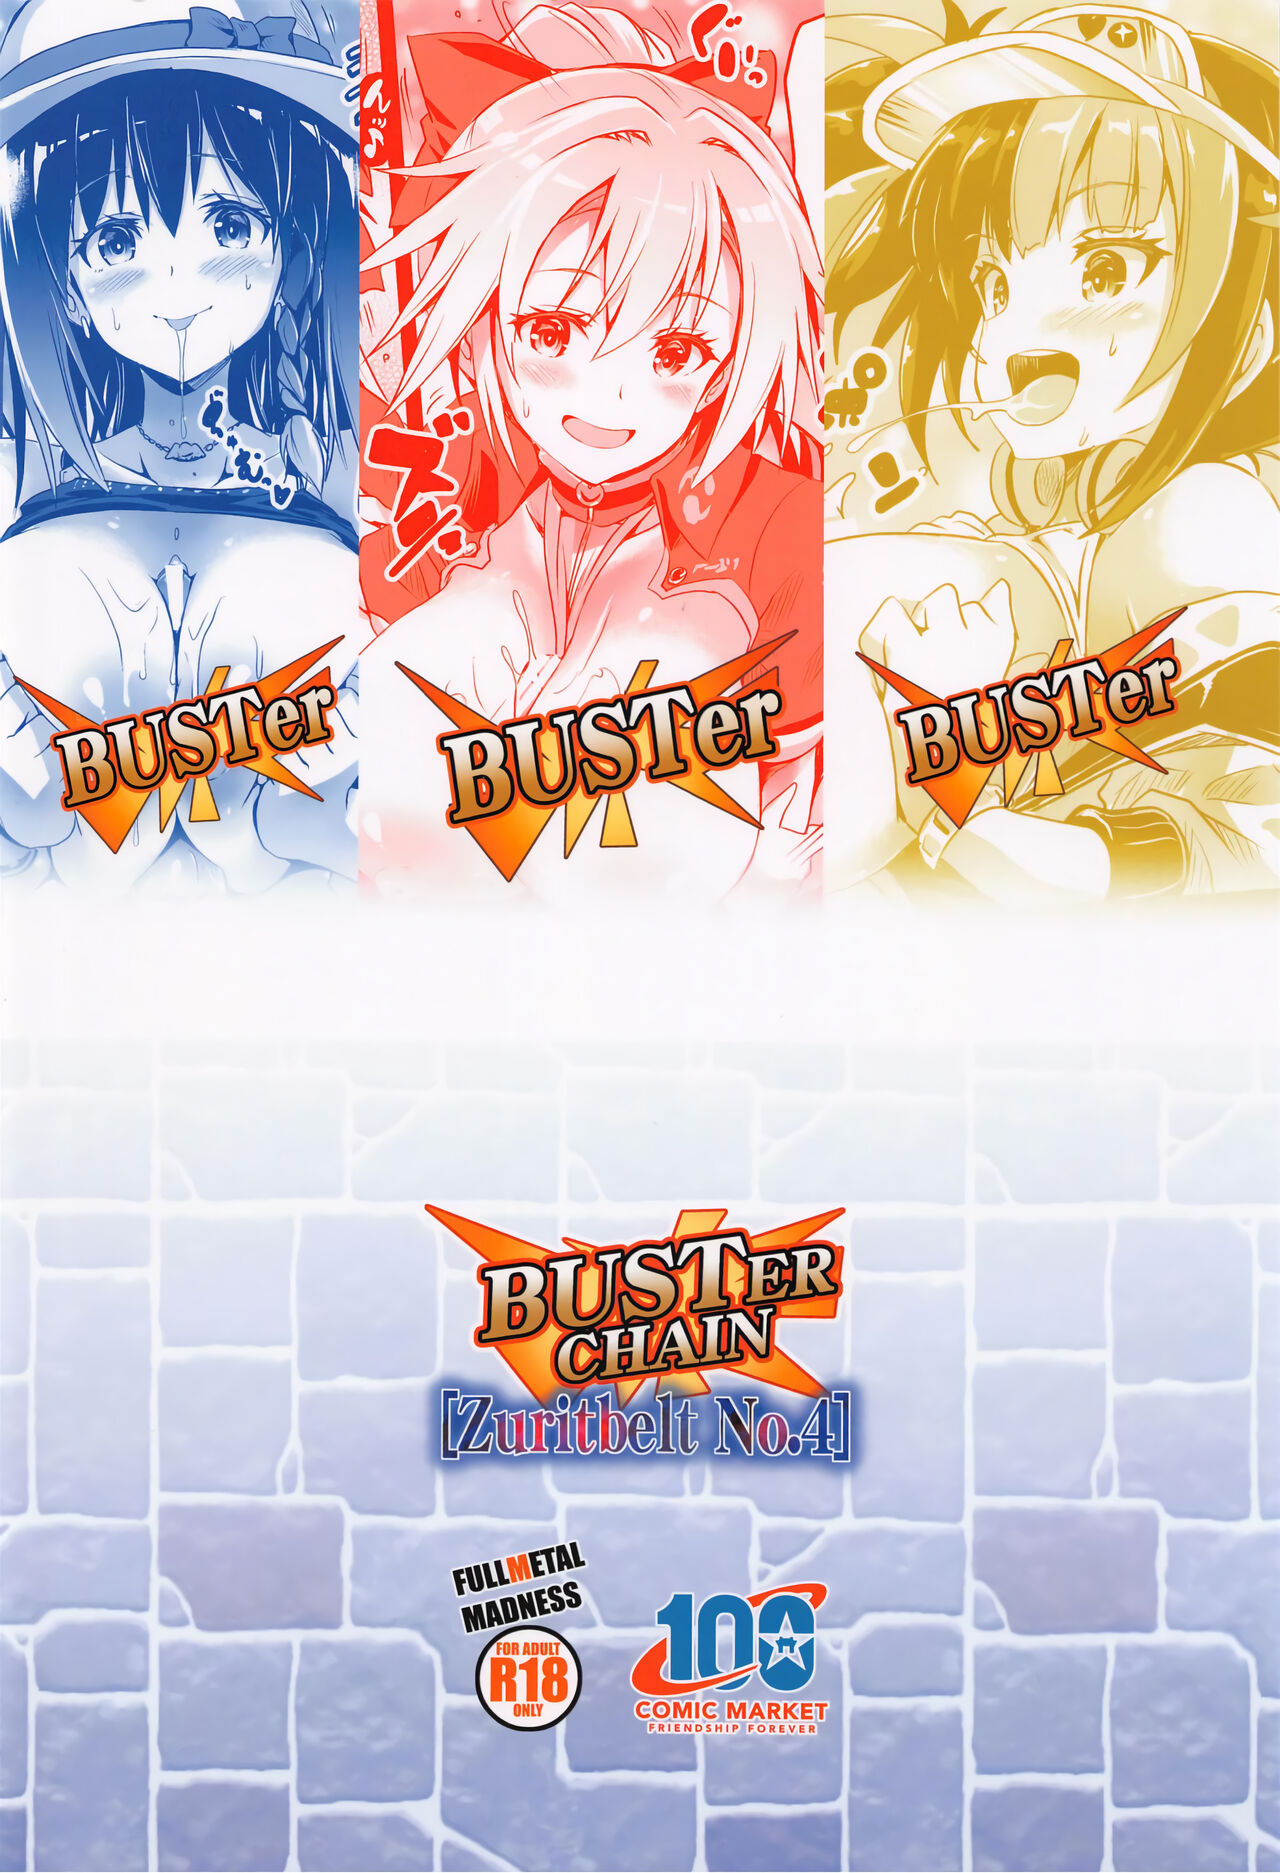 (C100) [FULLMETAL MADNESS (Asahi)] BUSTER CHAIN ZURITBELT No.4 (Fate/Grand Order) [Chinese] [黎欧出资汉化] (C100) [FULLMETAL MADNESS (旭)] BUSTER CHAIN ZURITBELT No.4 (Fate/Grand Order) [中国翻訳]